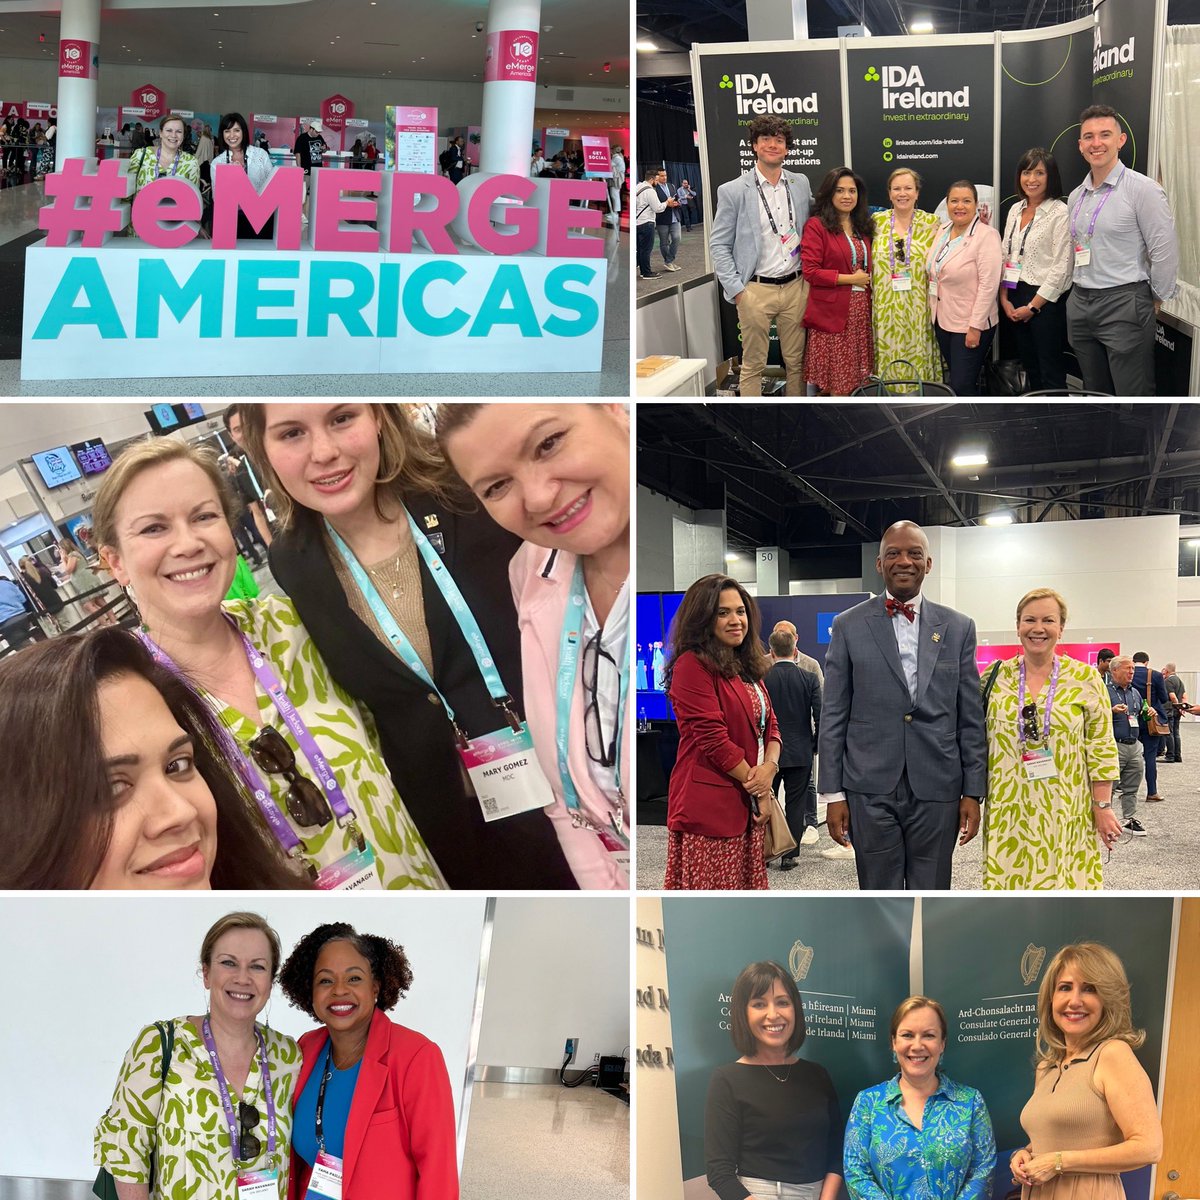 CG Sarah Kavanagh joined colleagues from @IDAIRELAND Ireland at @eMergeAmericas in @MiamiBeachNews today to highlight Ireland’s incredible offering to tech companies. It was super to introduce colleagues from #TeamIreland to some key Miami partners. ☘️🇮🇪🤝